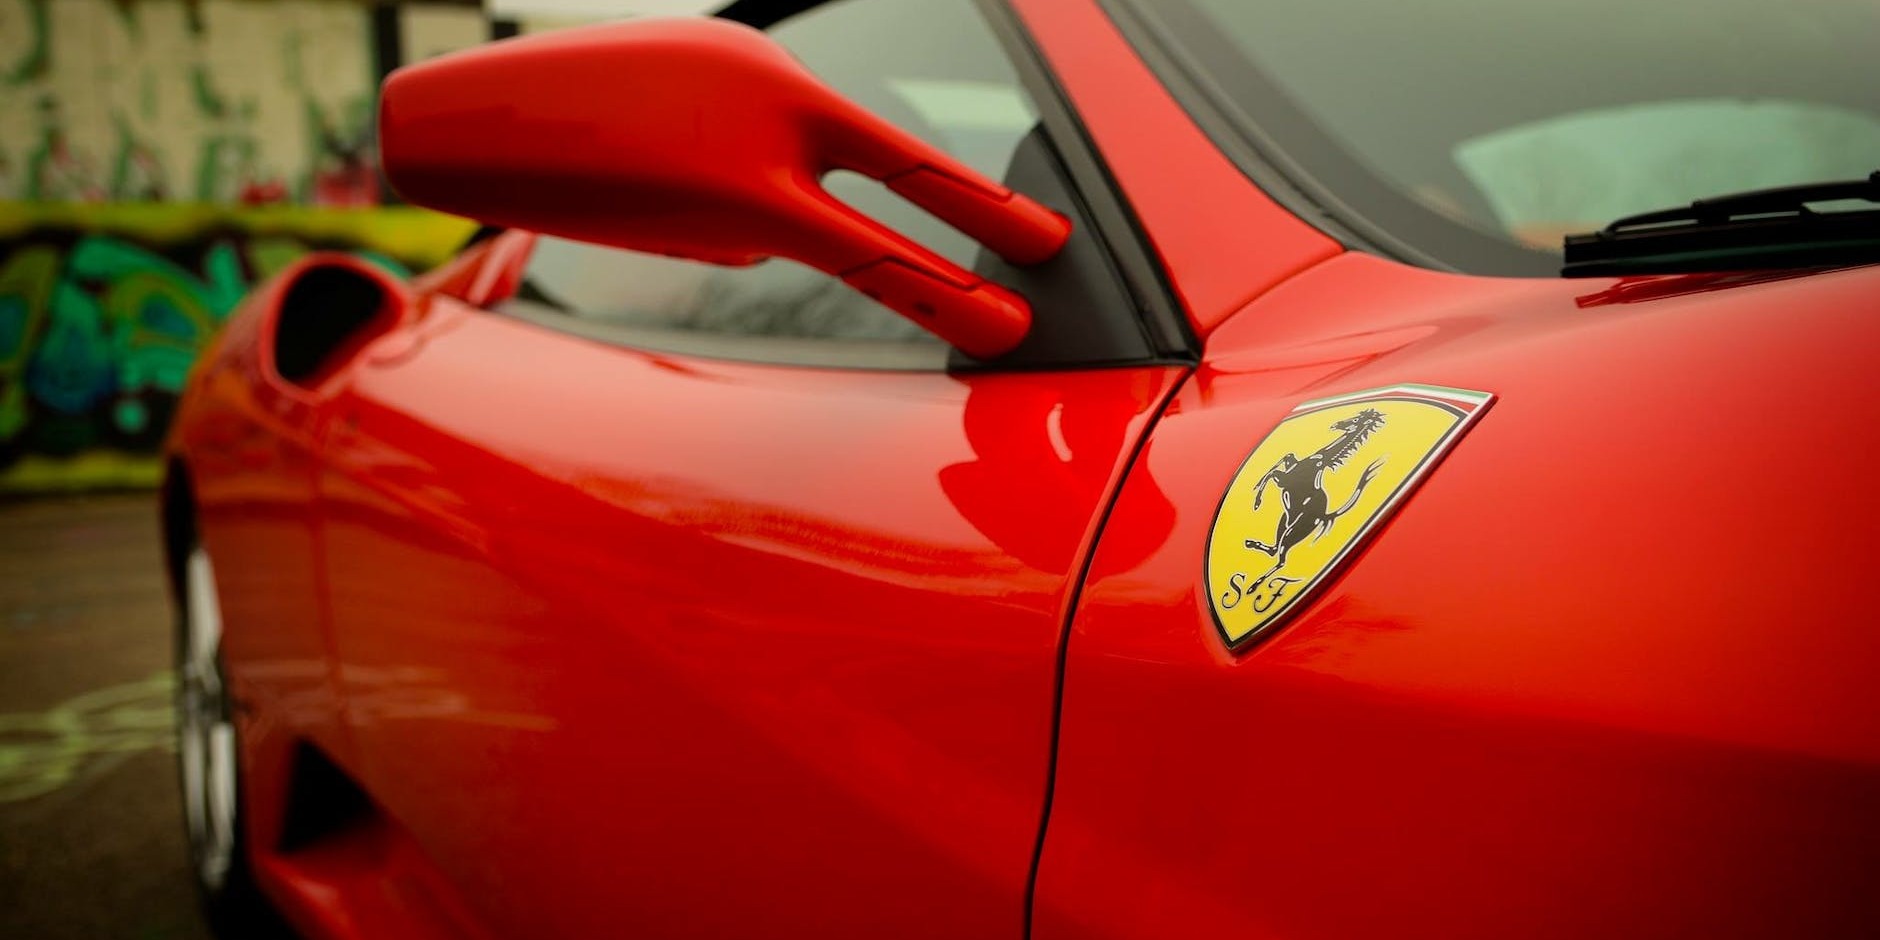 The Best Ferrari Models to Rent for a Day